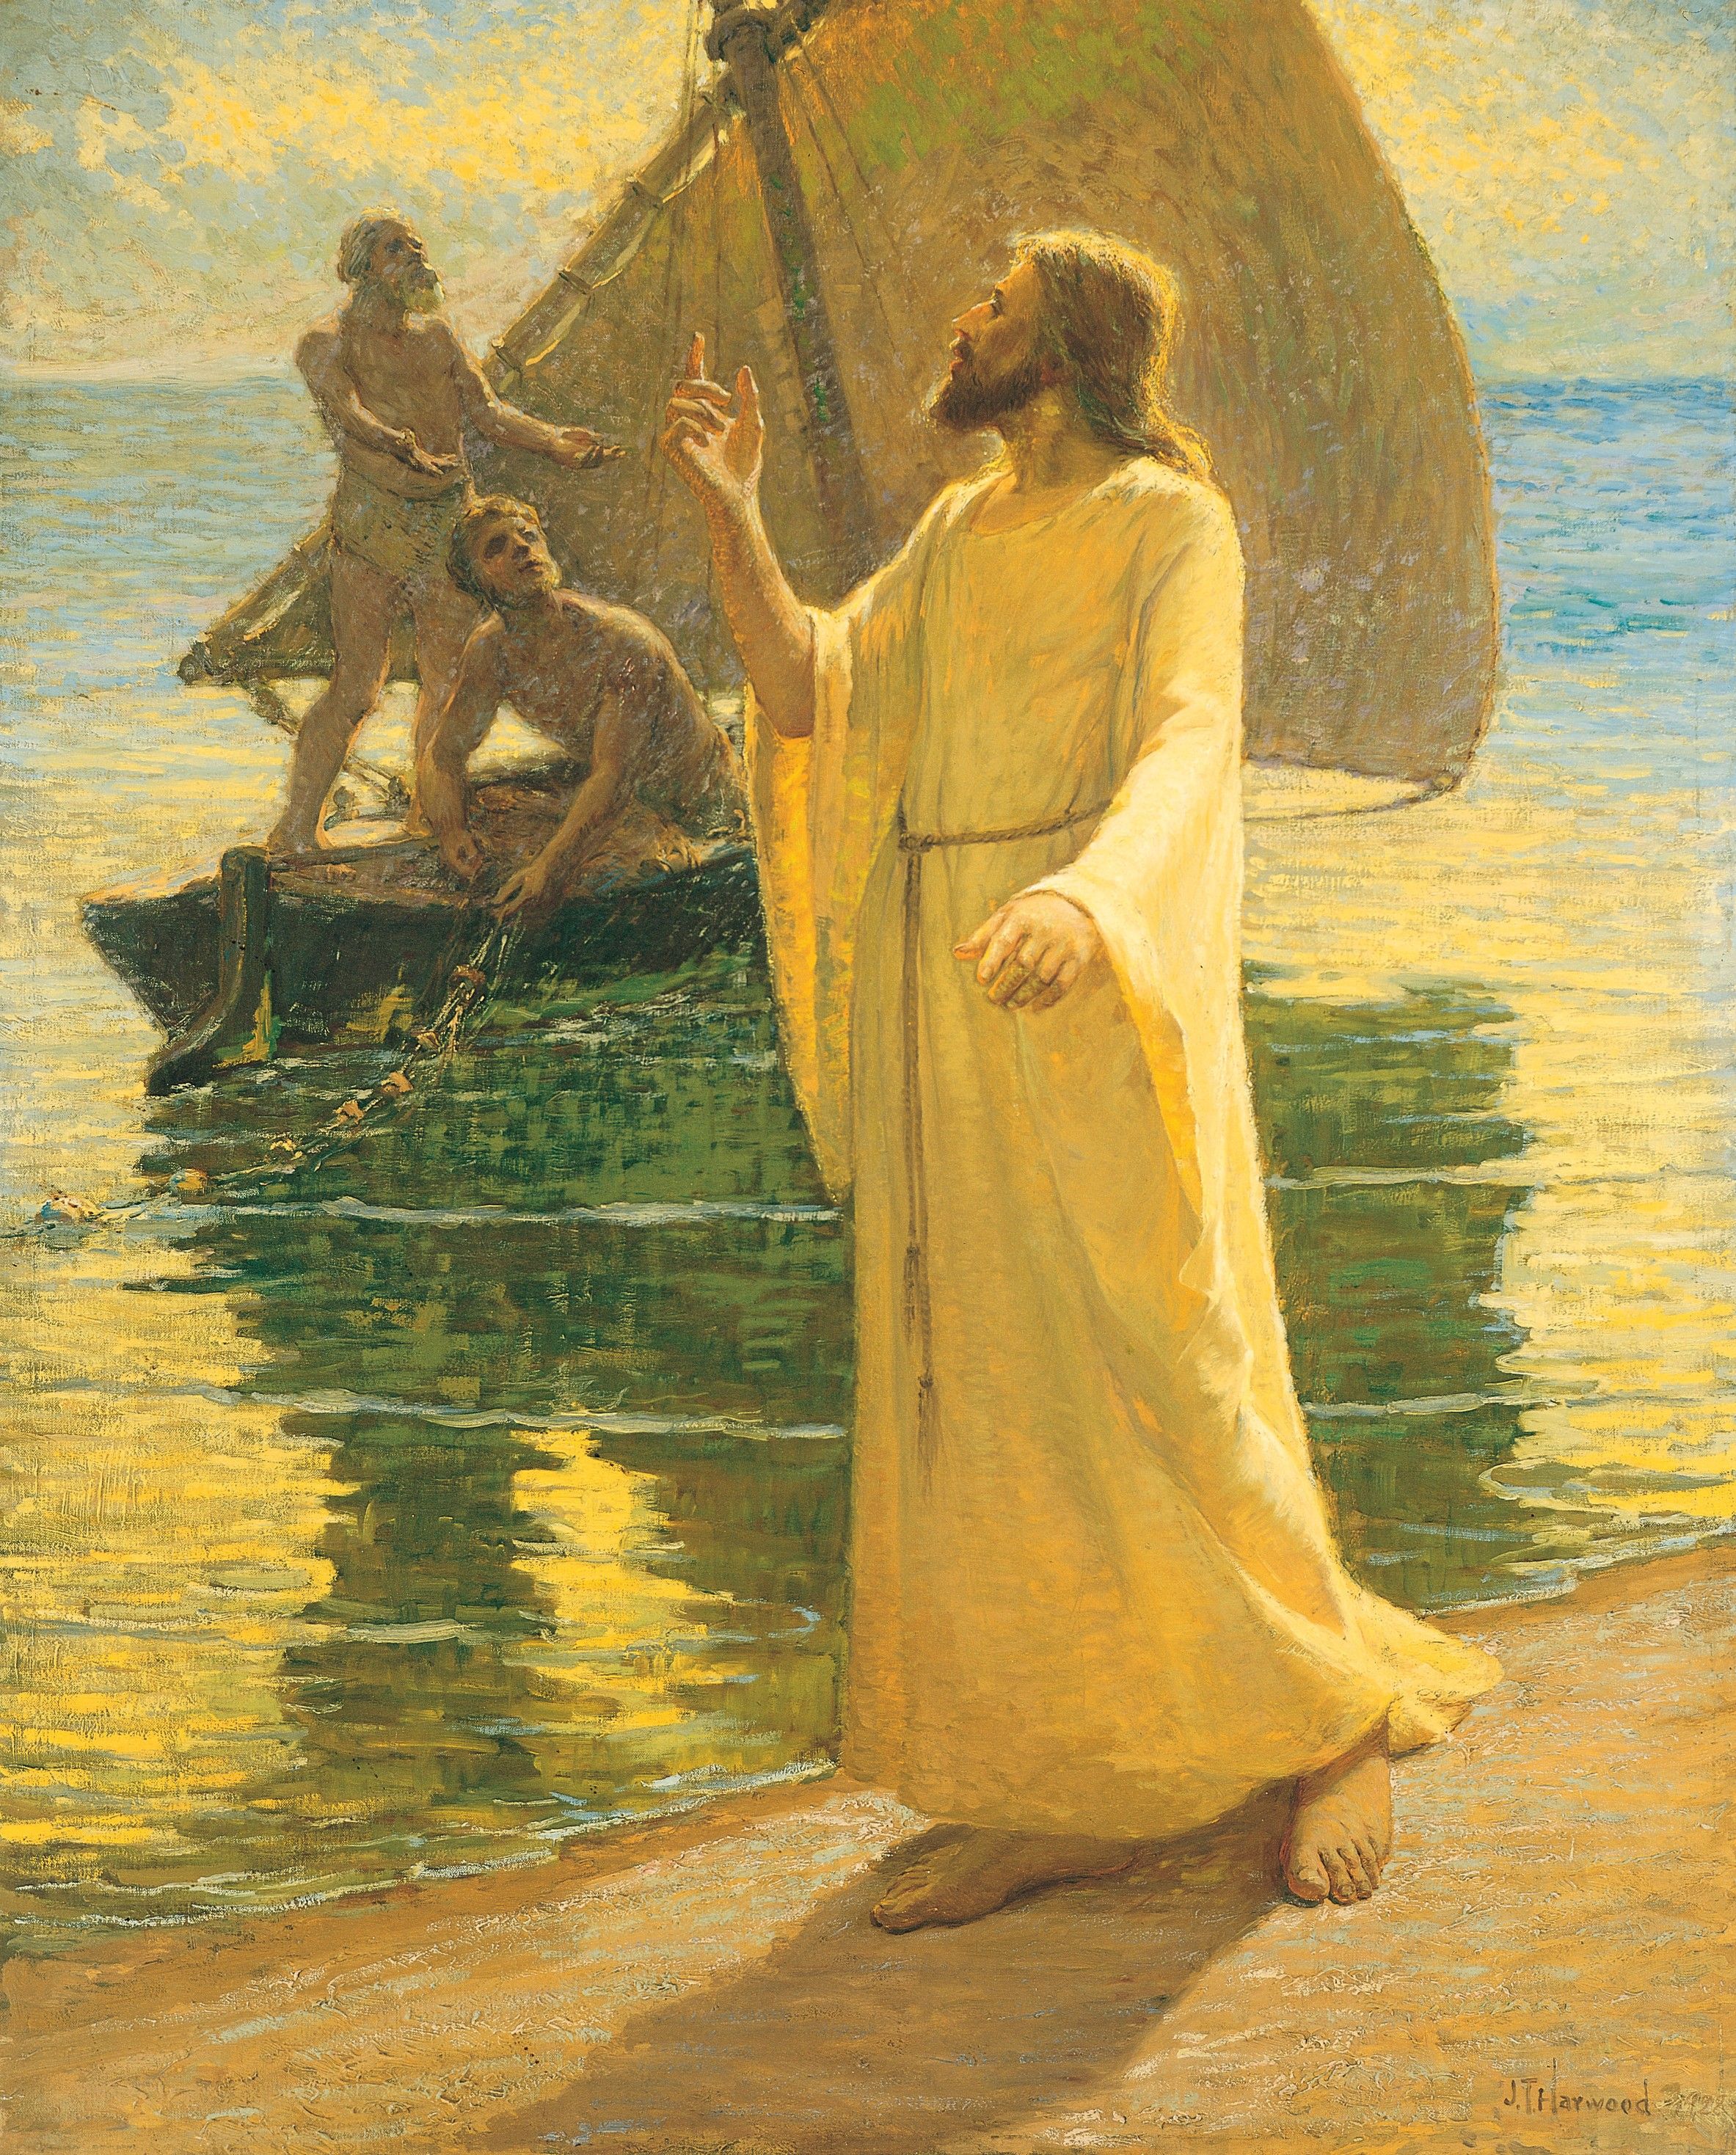 Christ Calling Peter and Andrew, by James T. Harwood